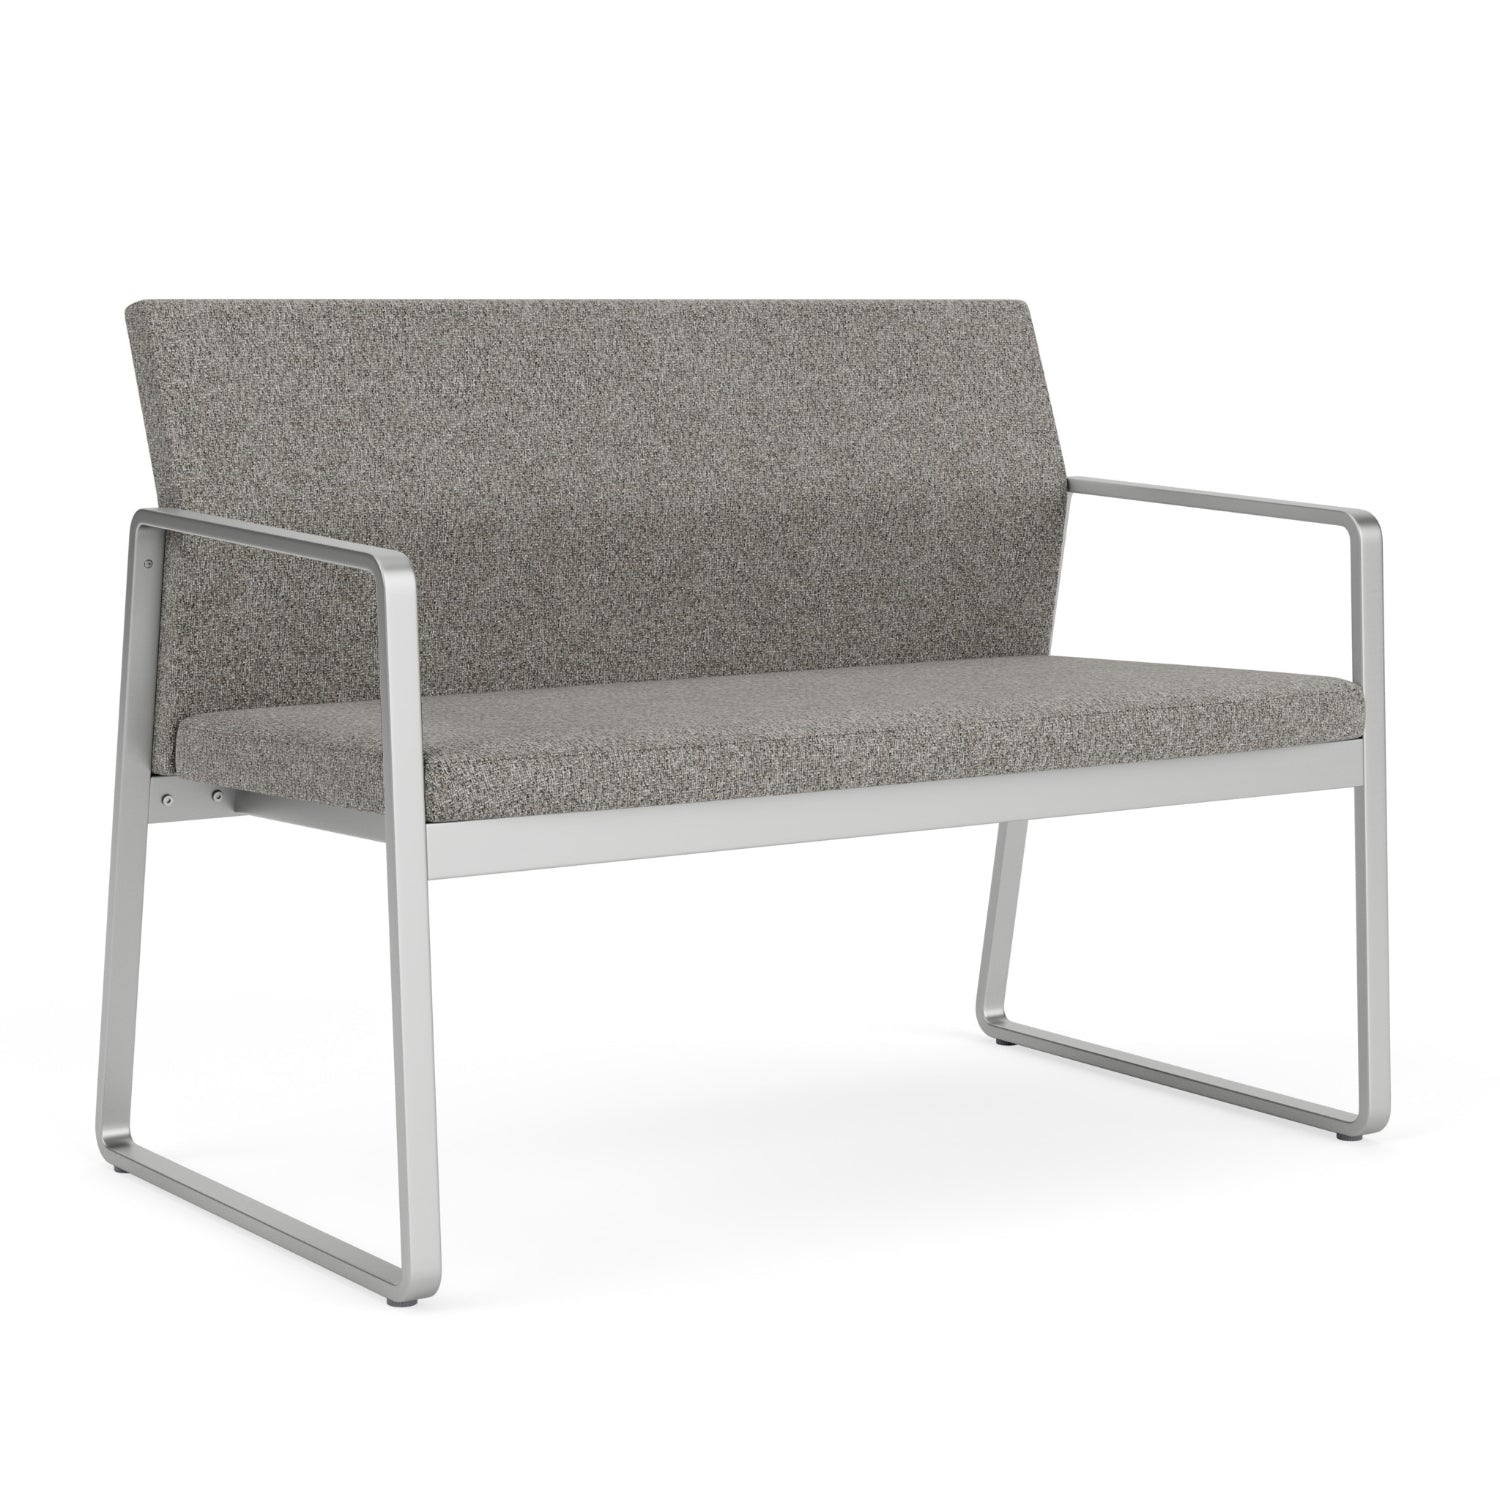 Gansett Collection Reception Seating, Loveseat, Standard Fabric Upholstery, FREE SHIPPING